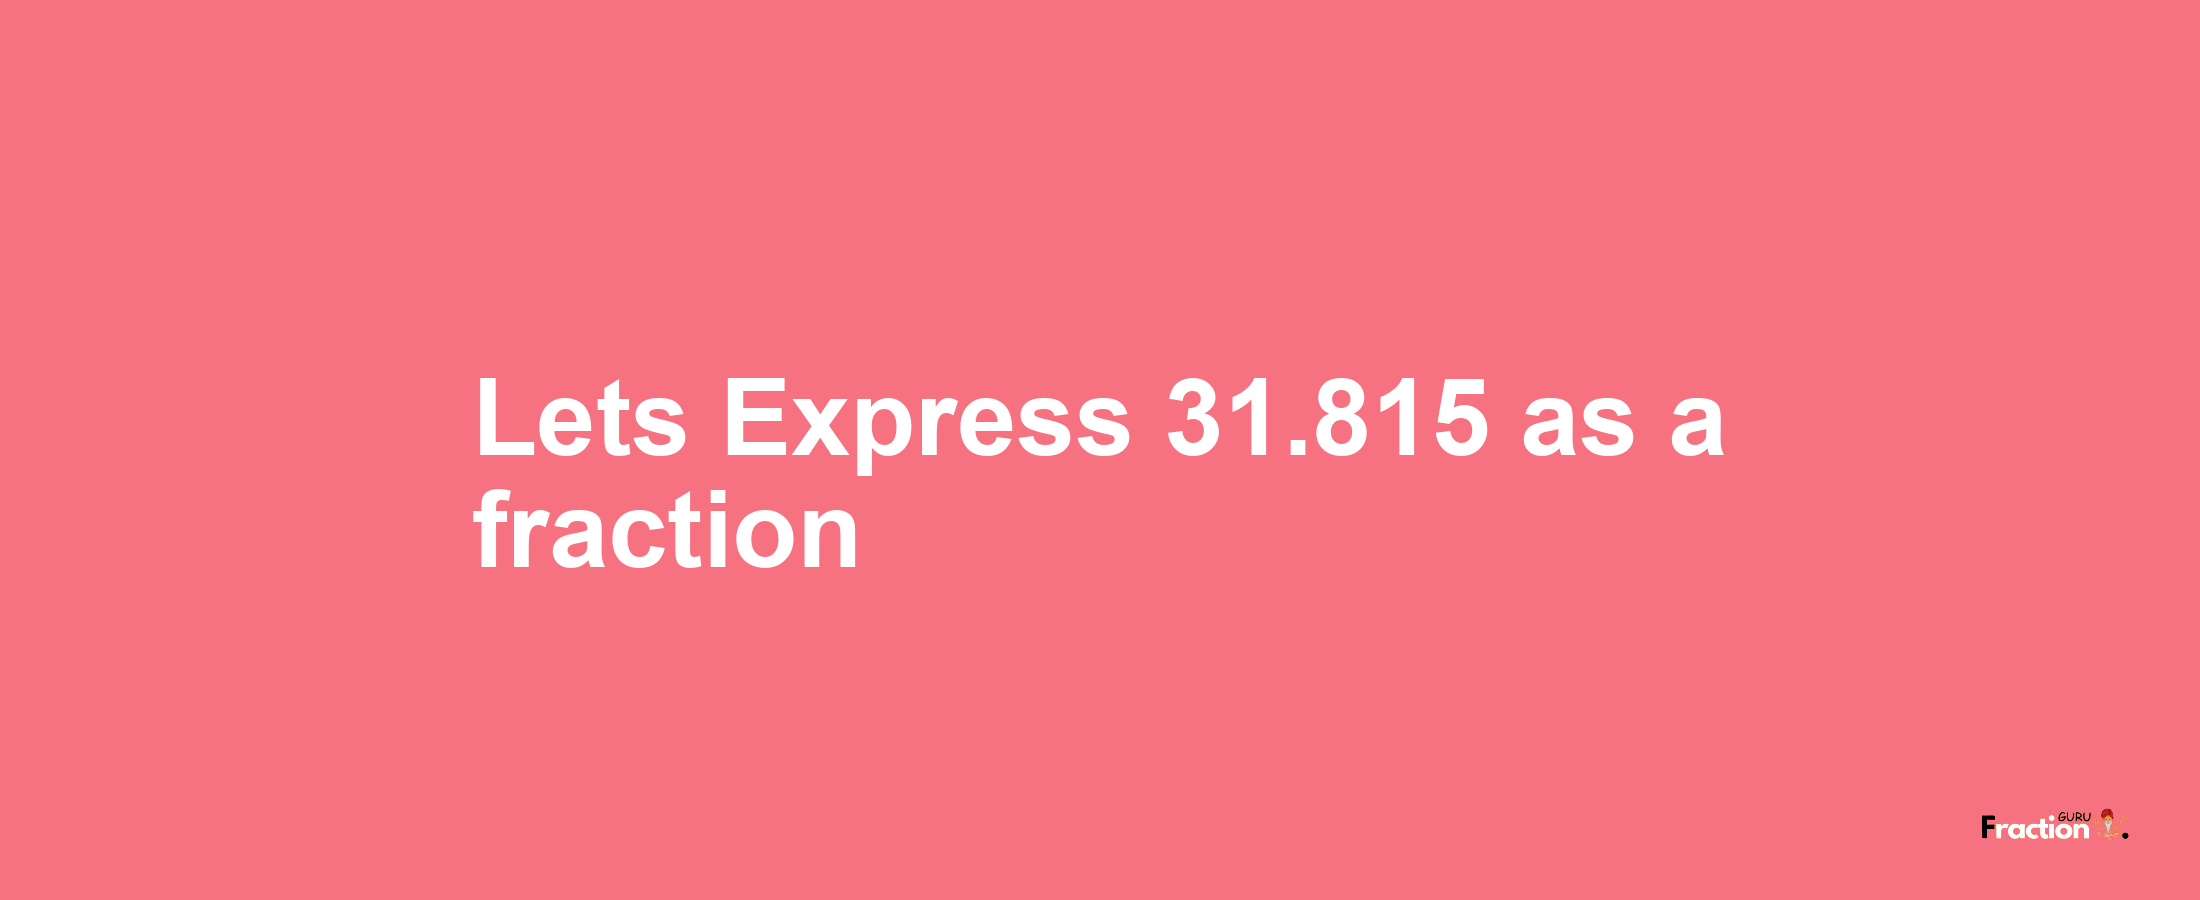 Lets Express 31.815 as afraction